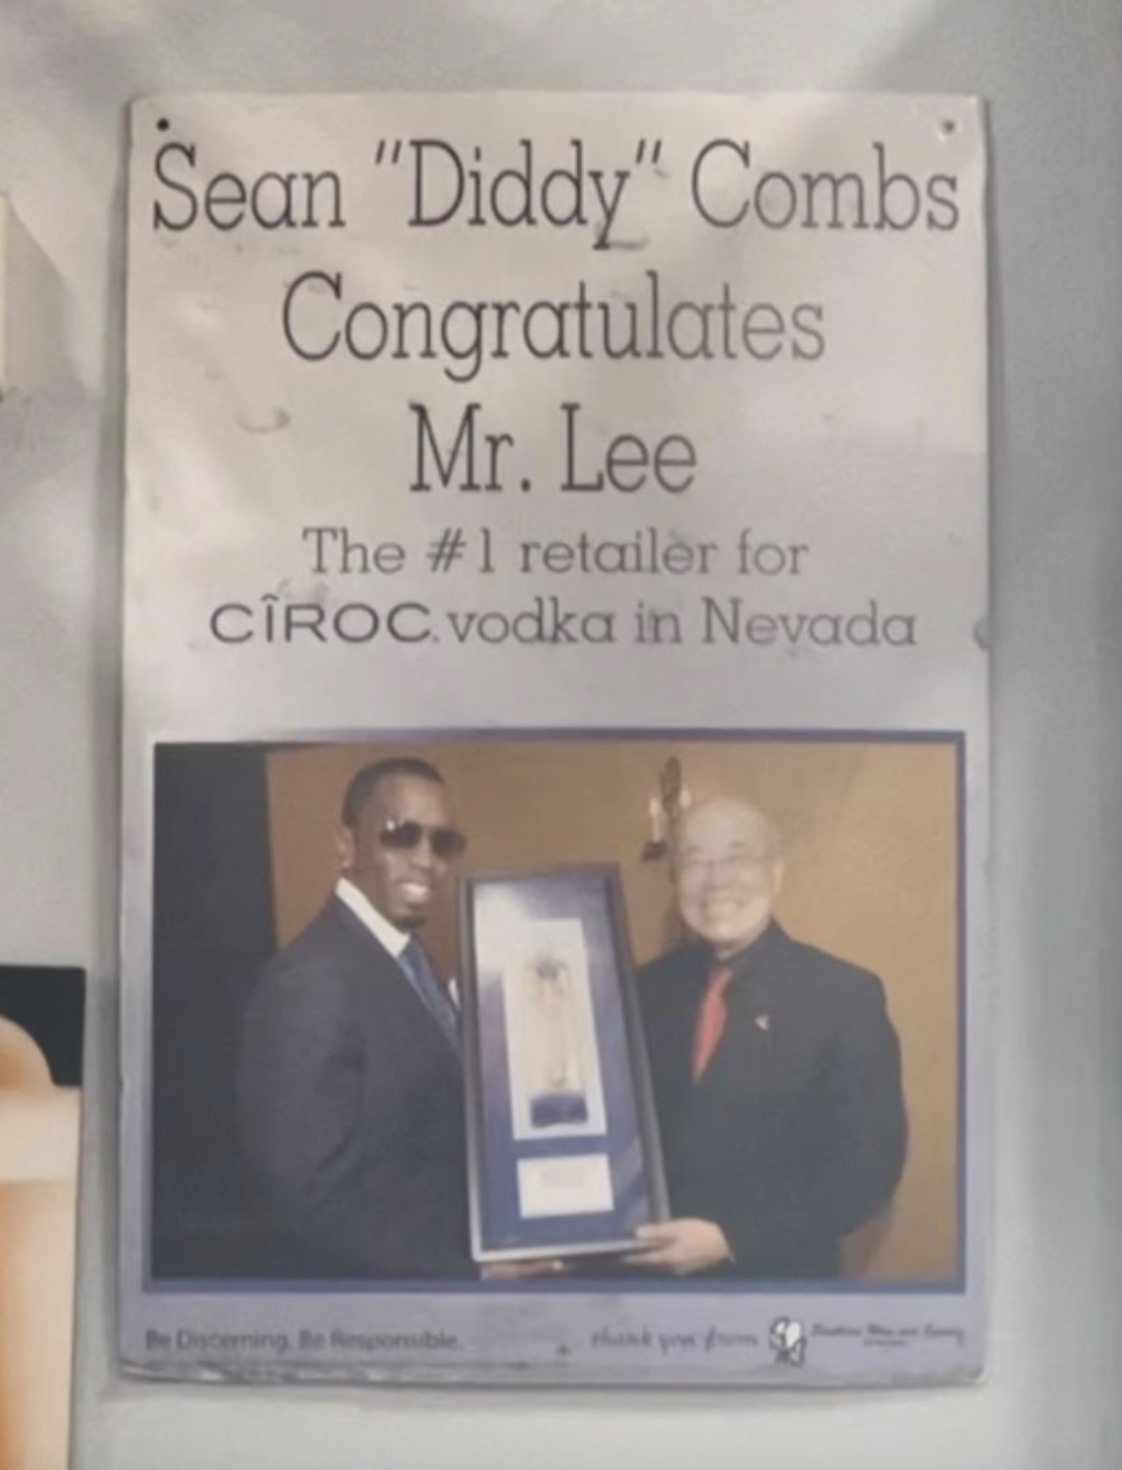 flat panel display - Sean "Diddy" Combs Congratulates Mr. Lee The retailer for Ciroc vodka in Nevada Deng Be